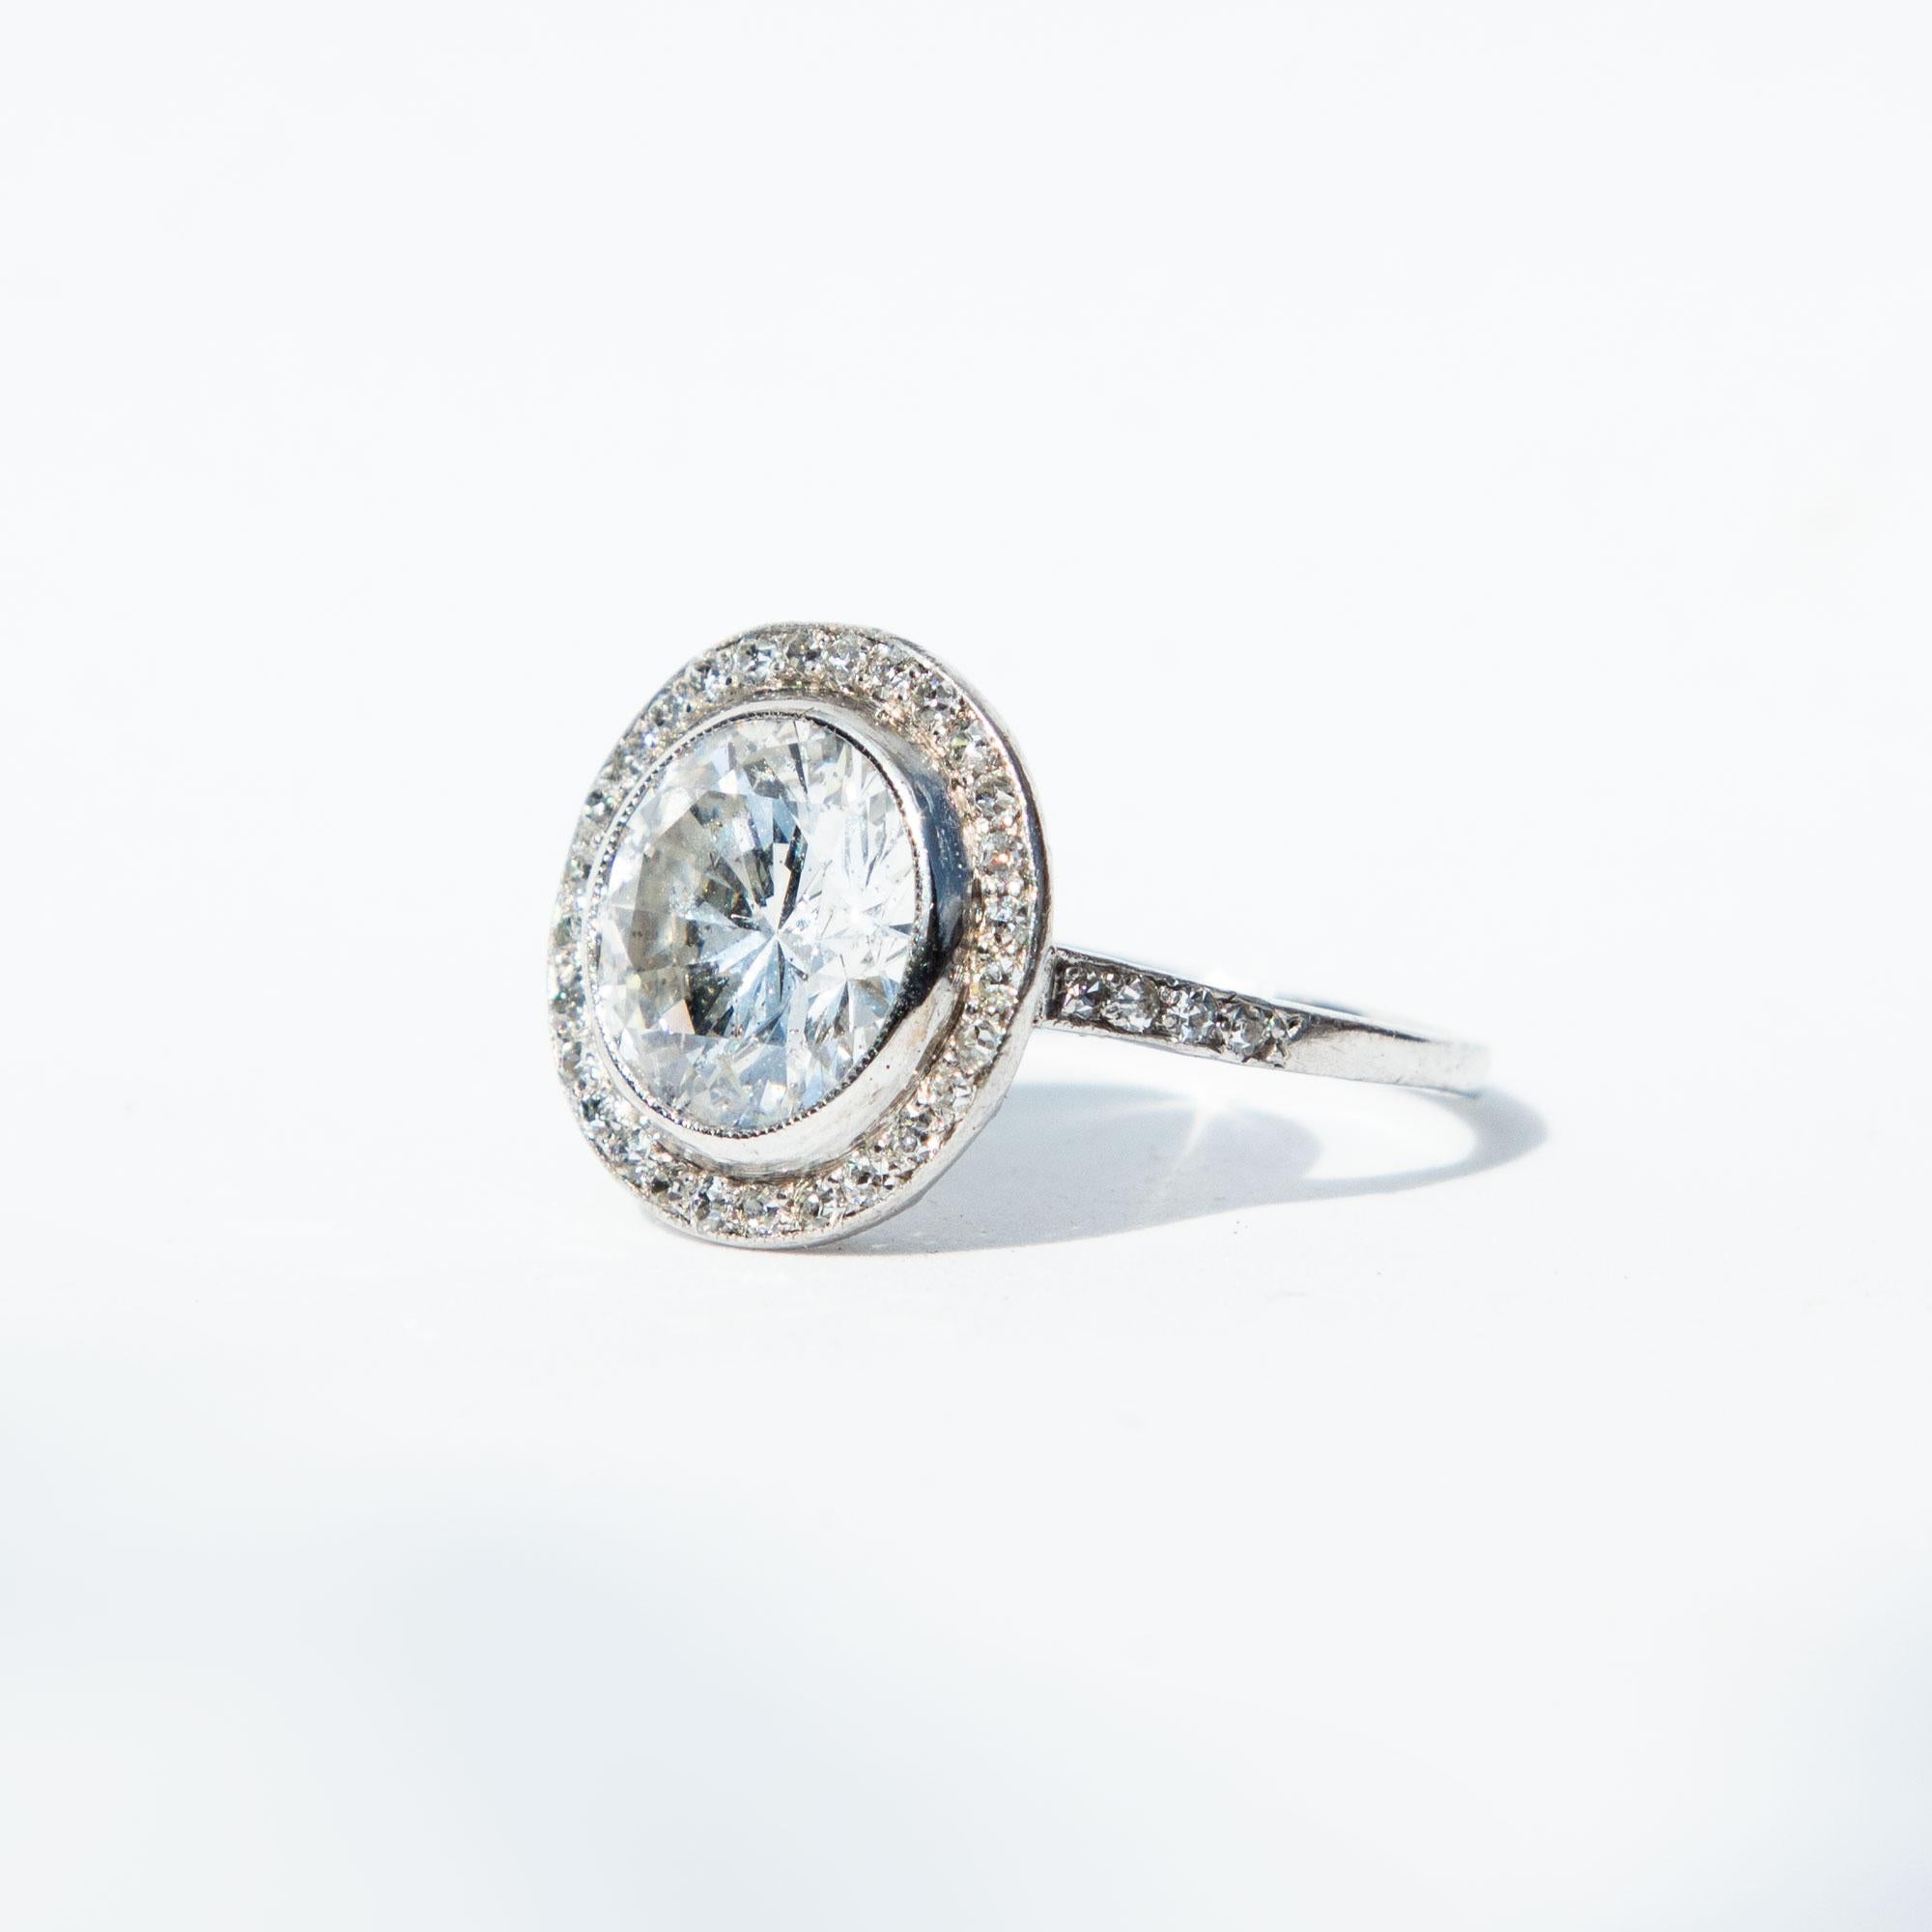 The stunning central diamond is a modern brilliant cut. This is surrounded by a halo of sparkling diamonds, with diamonds extending down the shoulders. Total diamond weight certified 3.62 carats, F colour and VS1/SI2 clarity. Modelled in platinum.